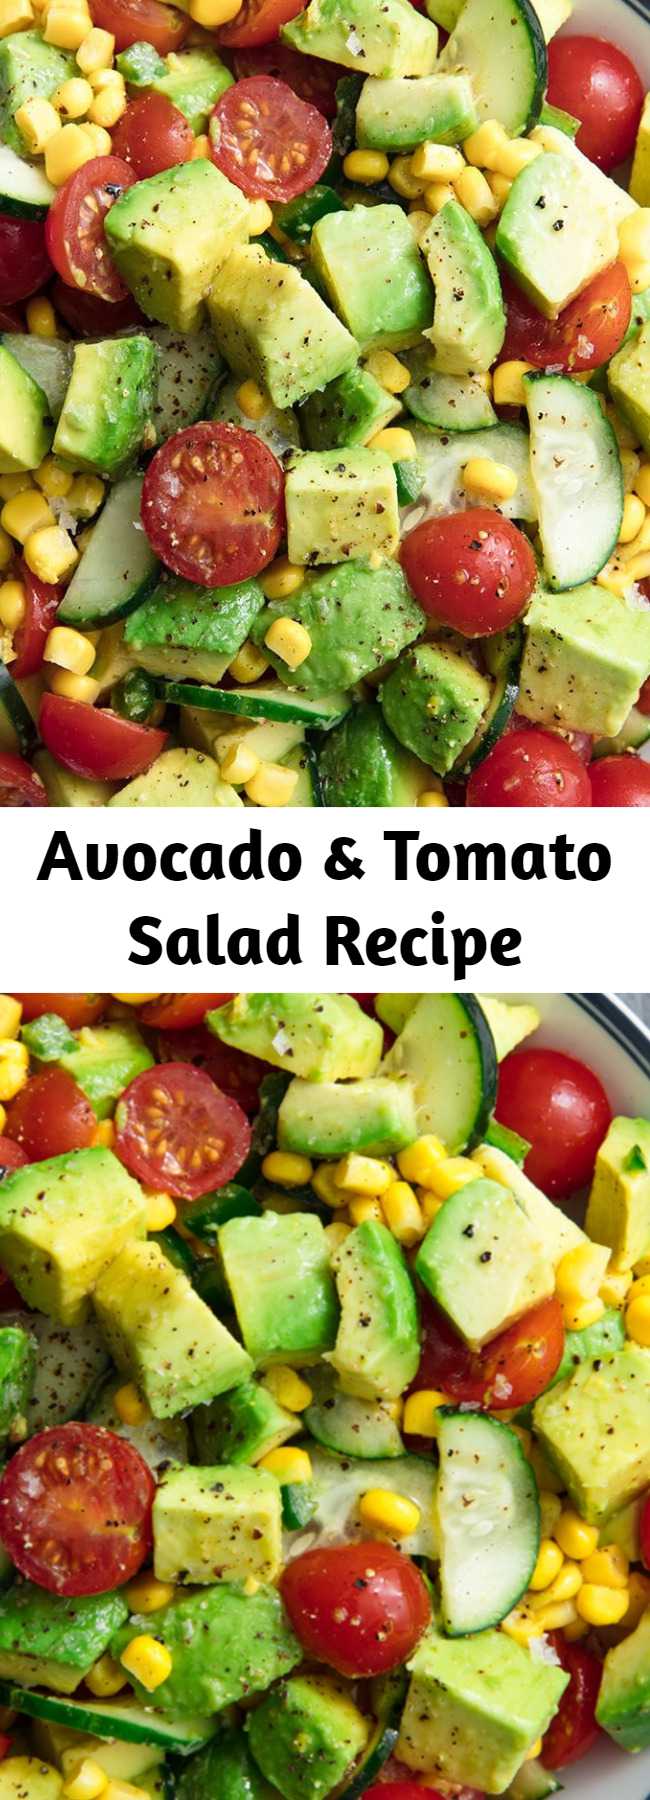 Avocado & Tomato Salad Recipe - Don't confuse this with guac — there's way more depth of flavor. You are, however, totally welcome to eat it with chips. (Just know it tastes amazing with out 'em.) #easyrecipe #avocado #salad #summer #food